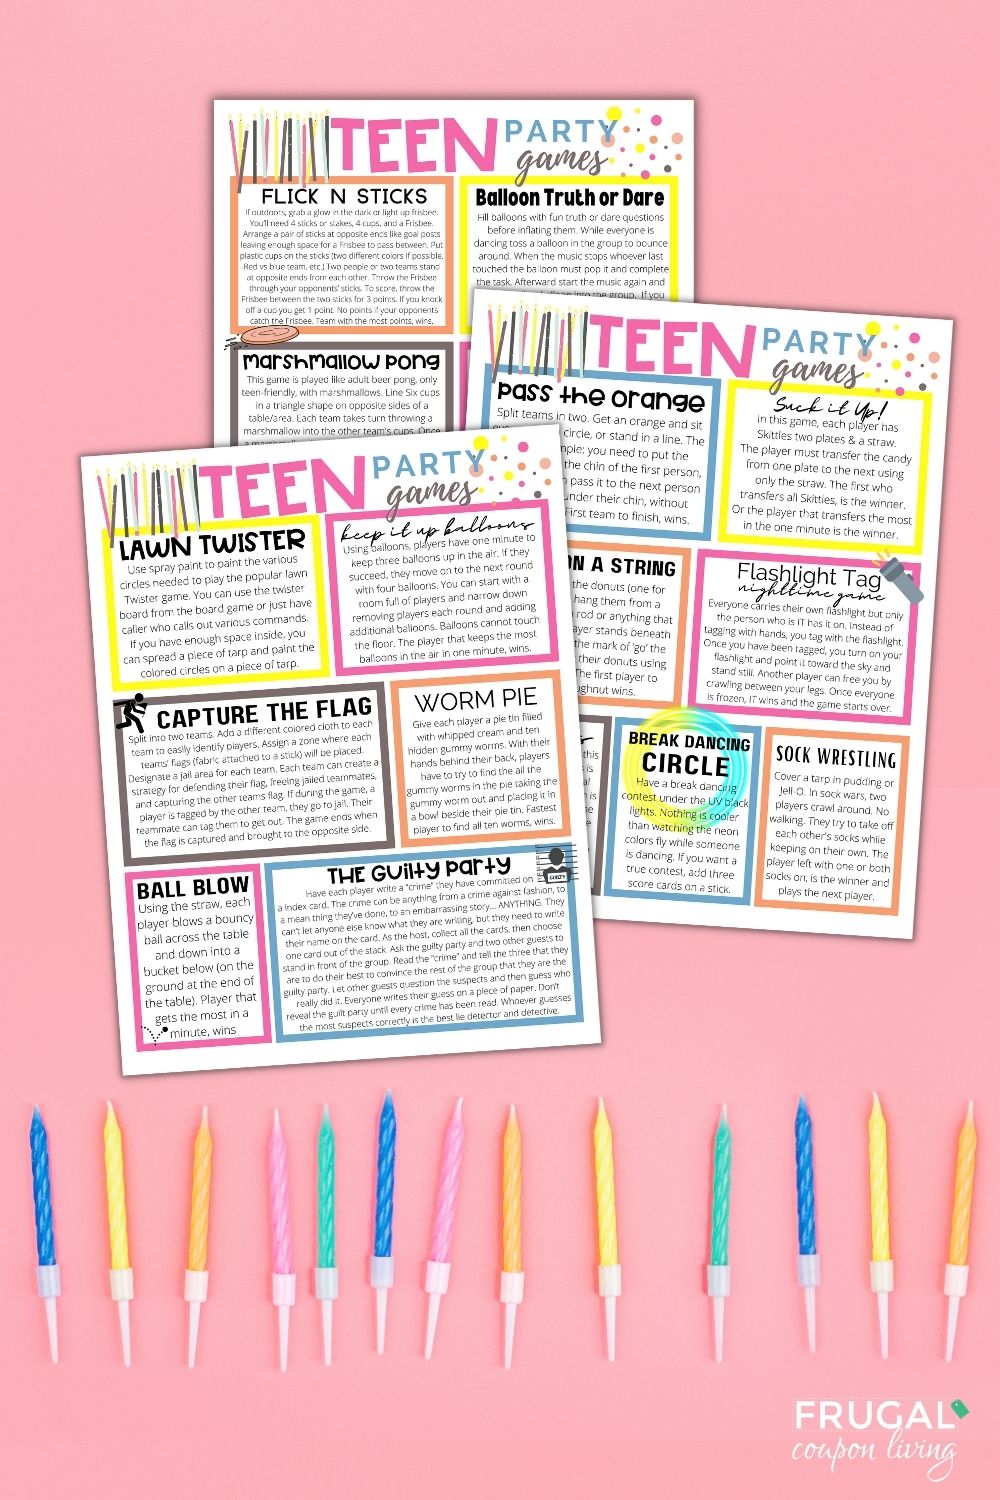 The Best Teen Birthday Party Ideas - Printable Games for Teenagers – Frugal Coupon Living